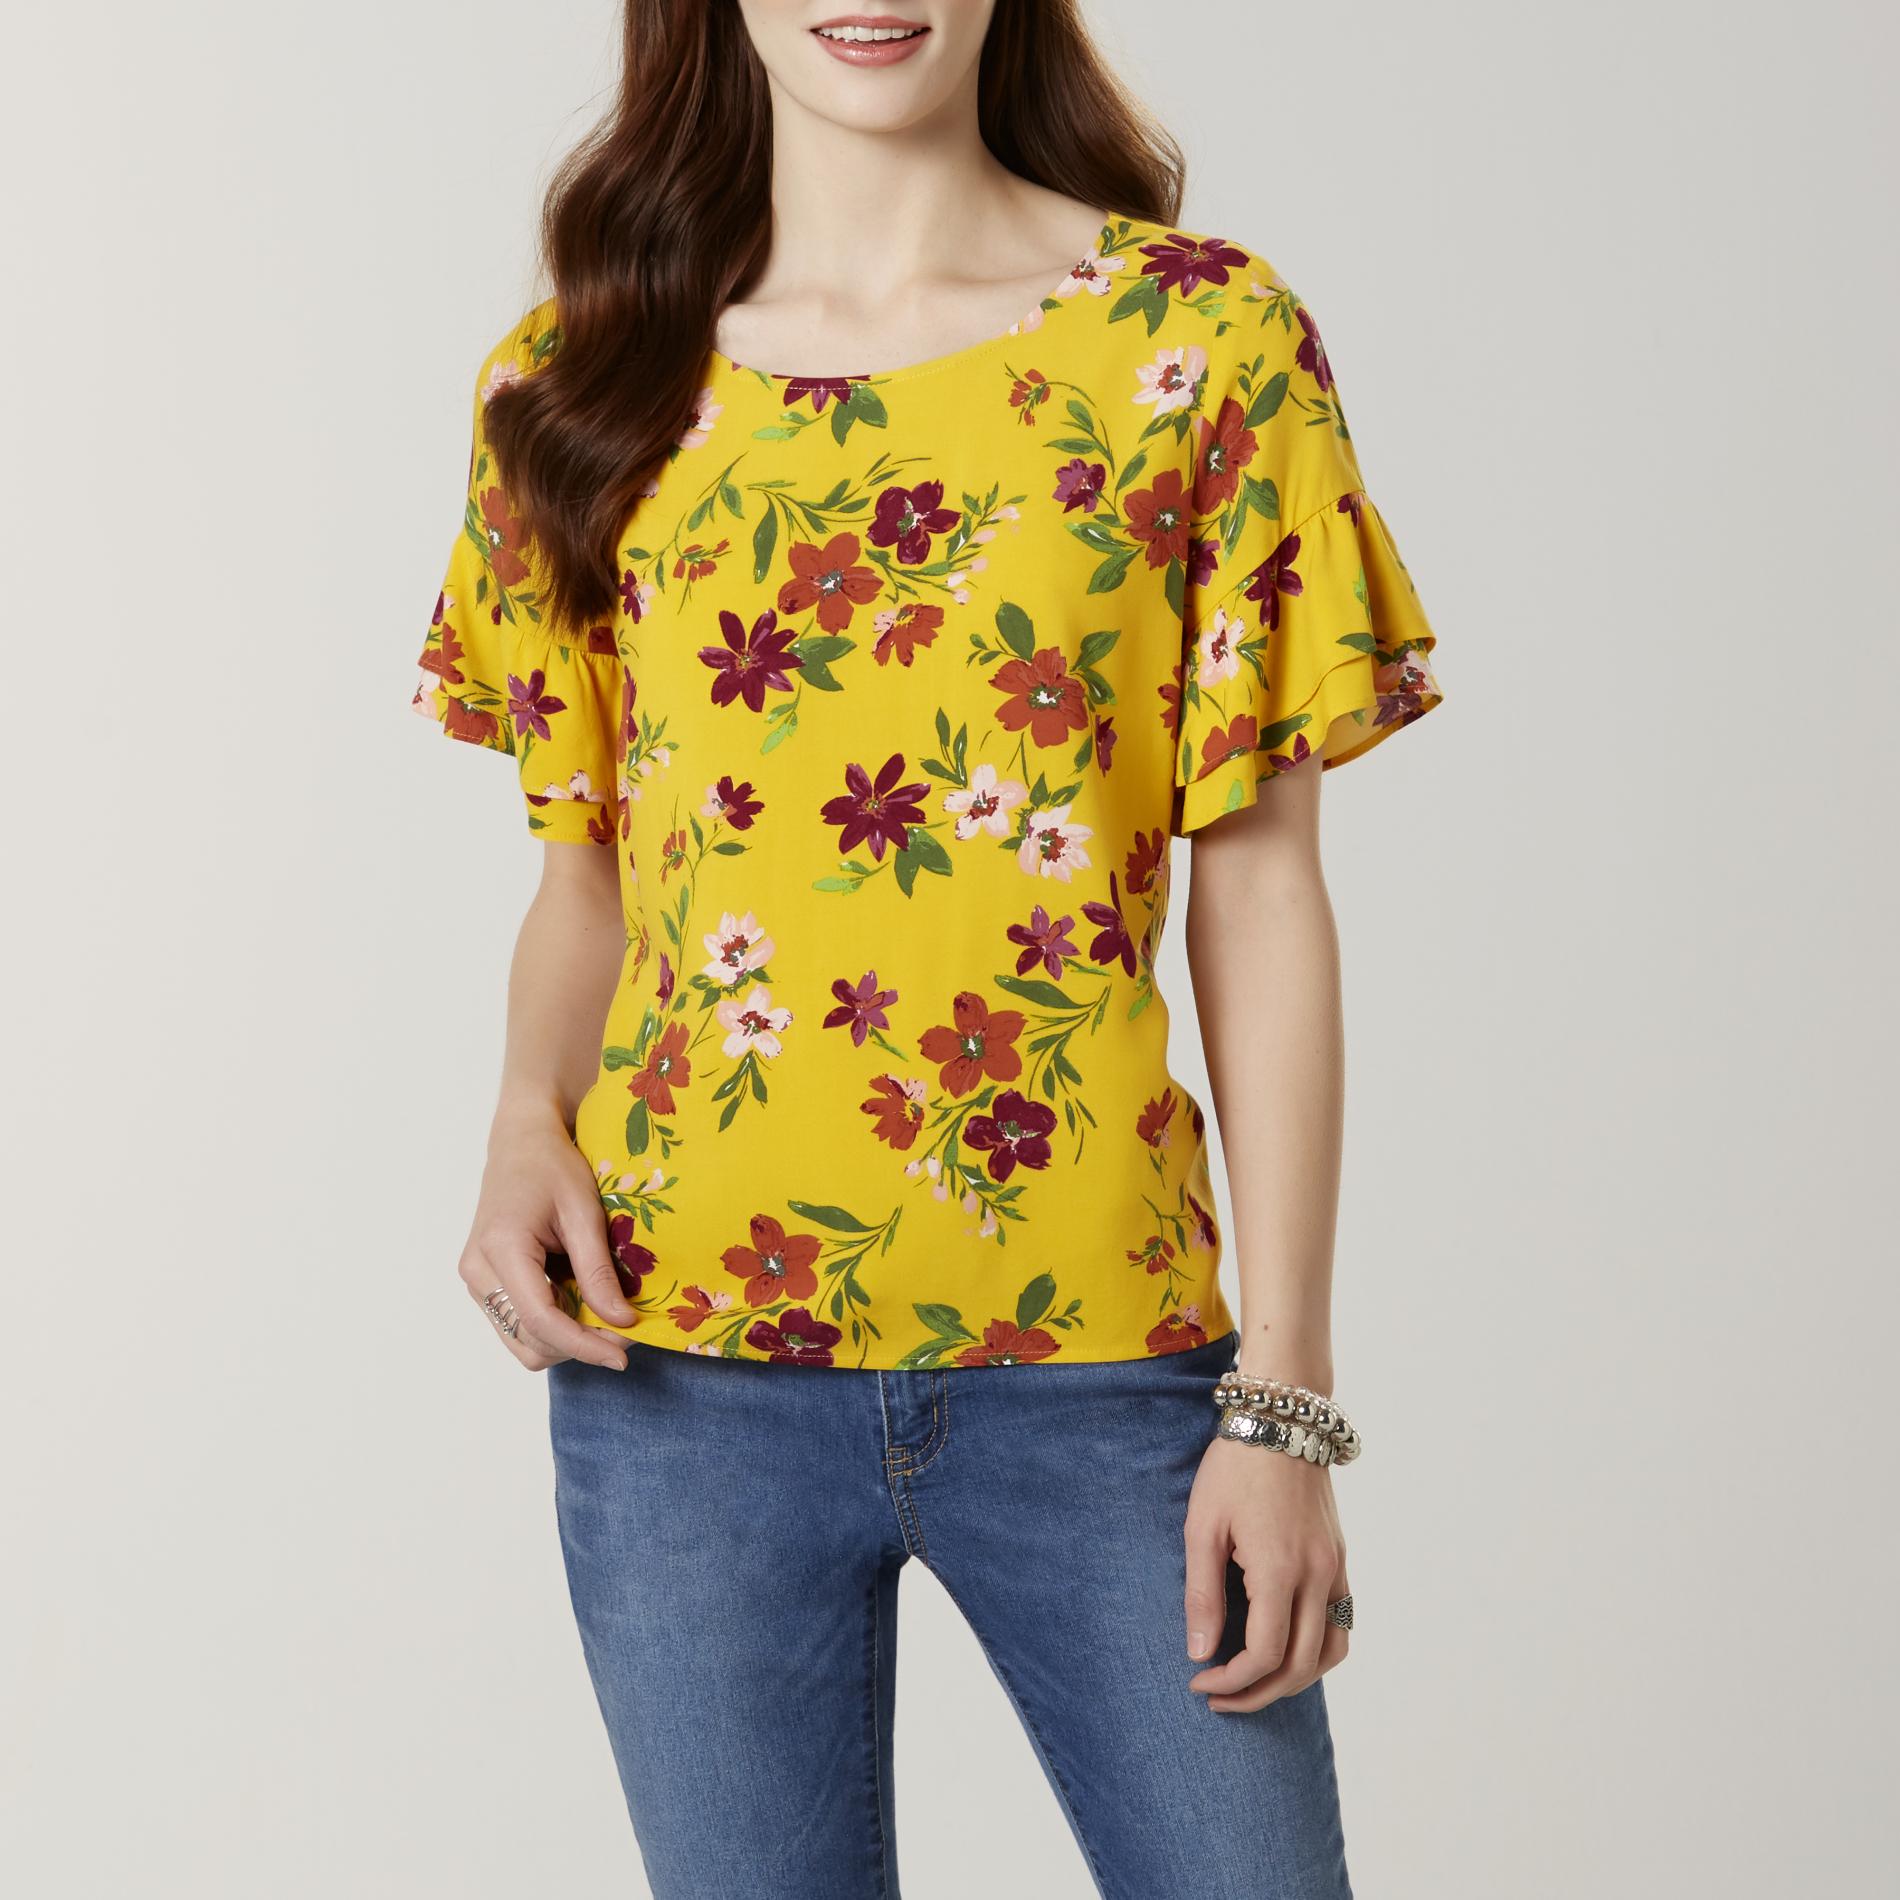 Route 66 Women's Ruffle Sleeve Top - Floral